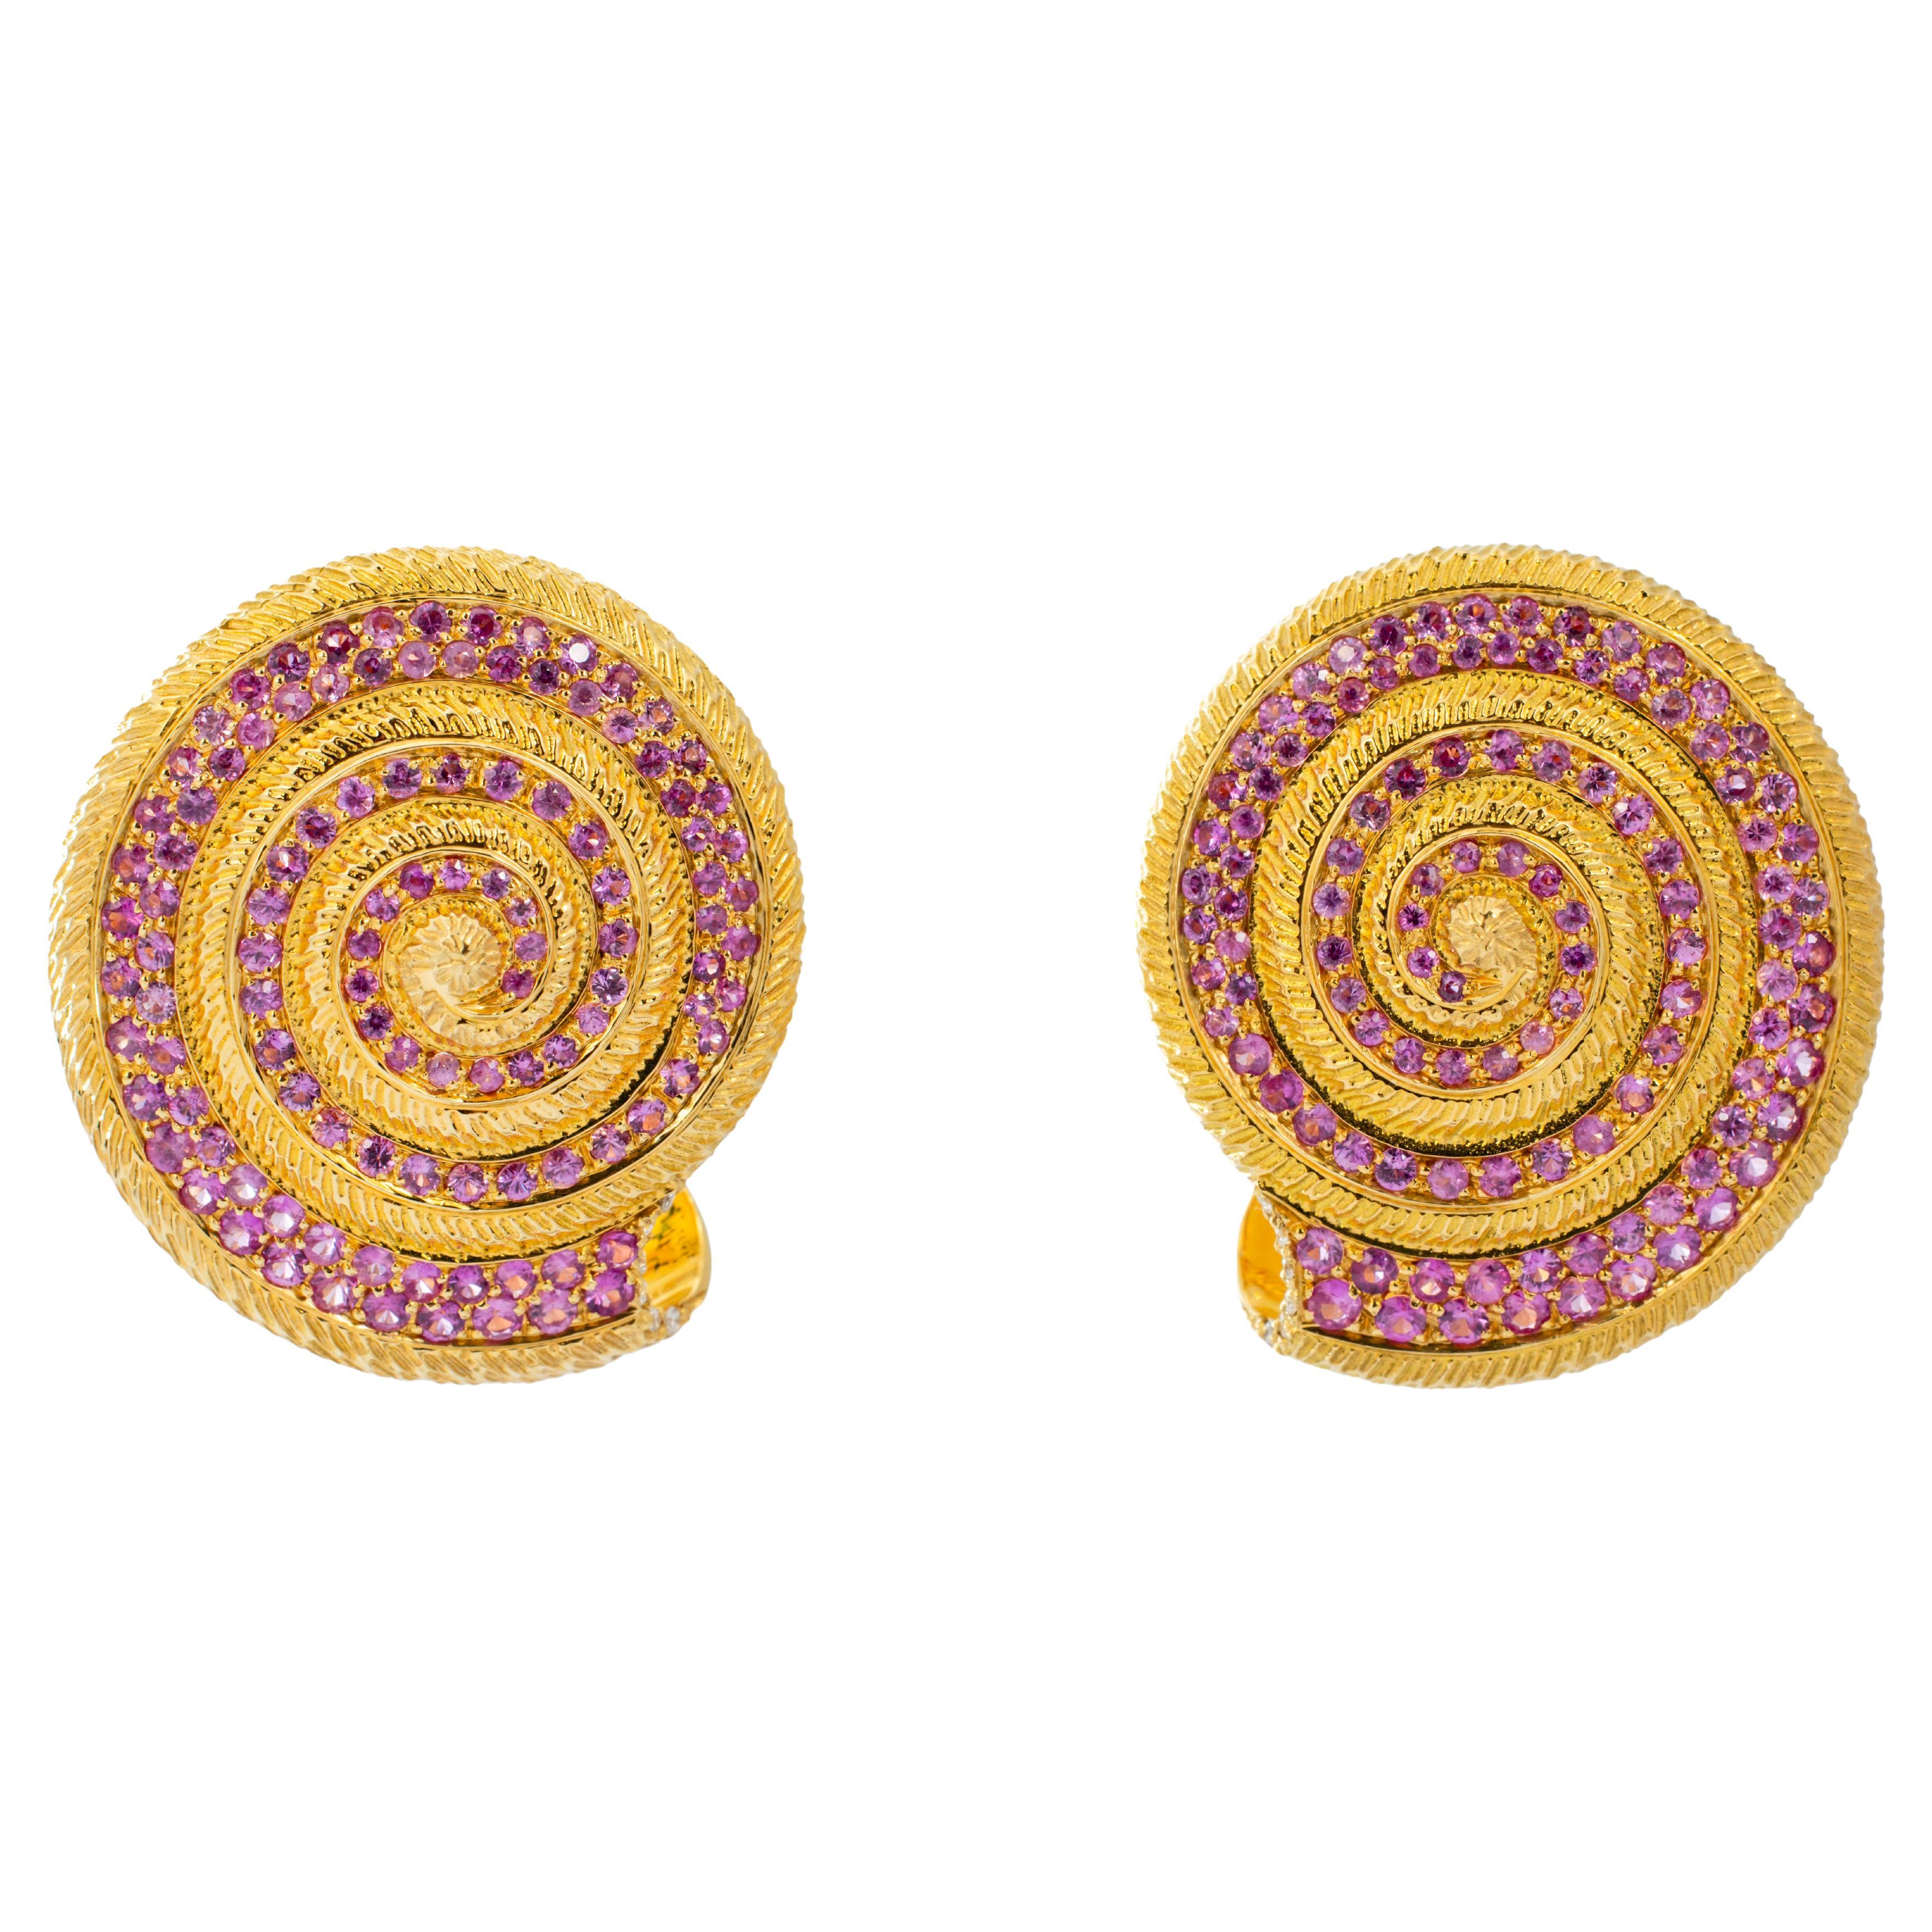 "Costis" Snail Shell Frontal Earrings, Pave' with 4.07 Carats of Pink Sapphires